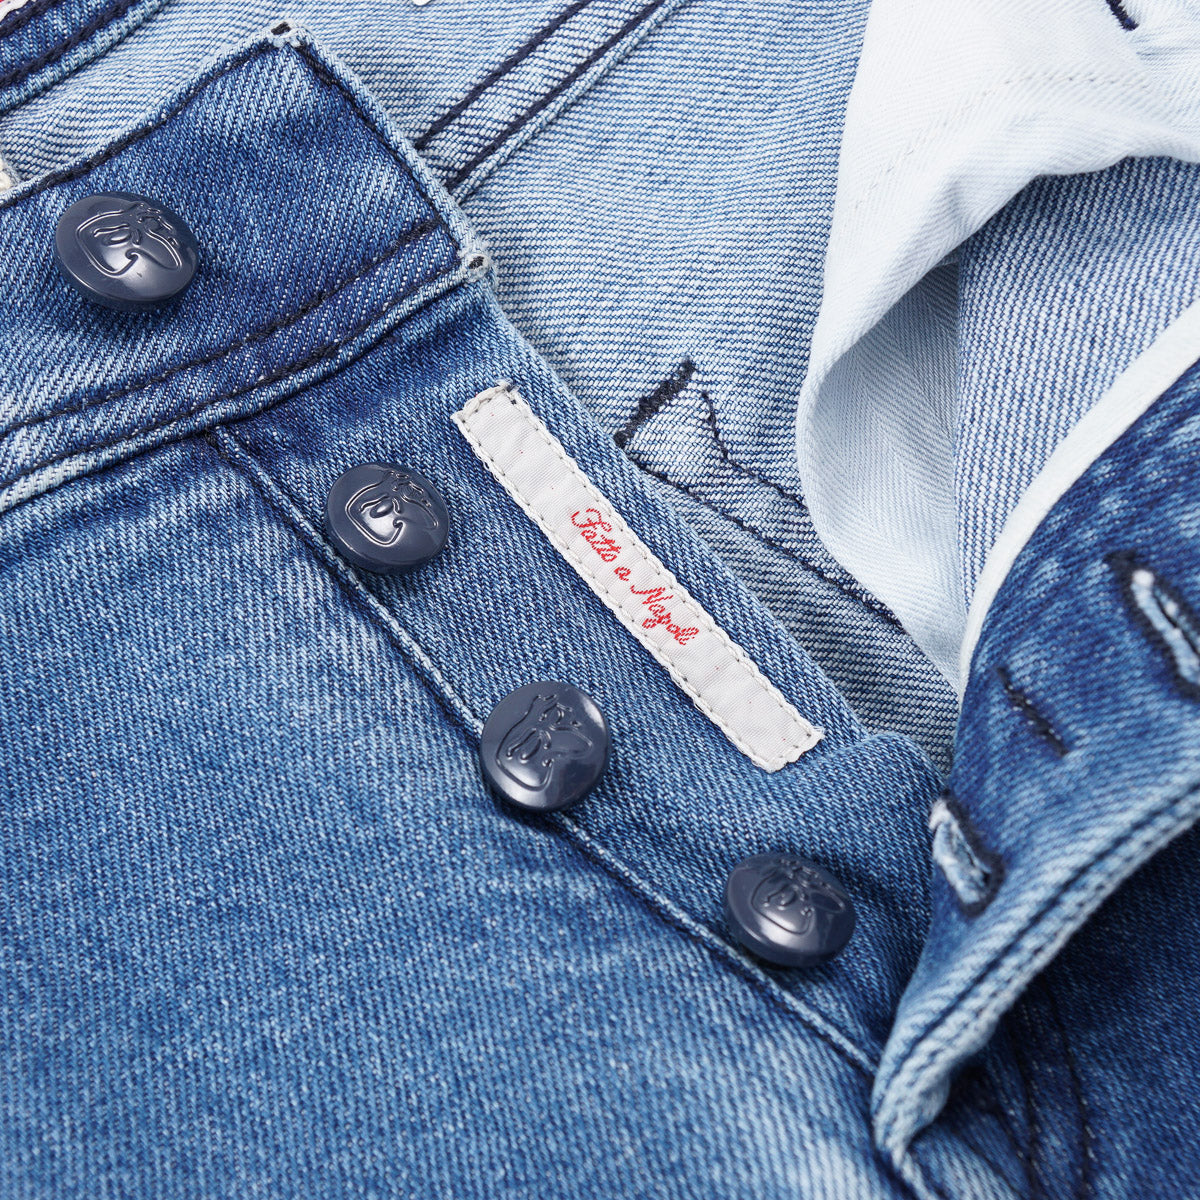 Dark Blue Jeans Back Pocket Isolated On White Background Denim Fashion Pocket  Design Closeup Of Stitch Seams Rivet And Fabric Texture Stock Photo -  Download Image Now - iStock